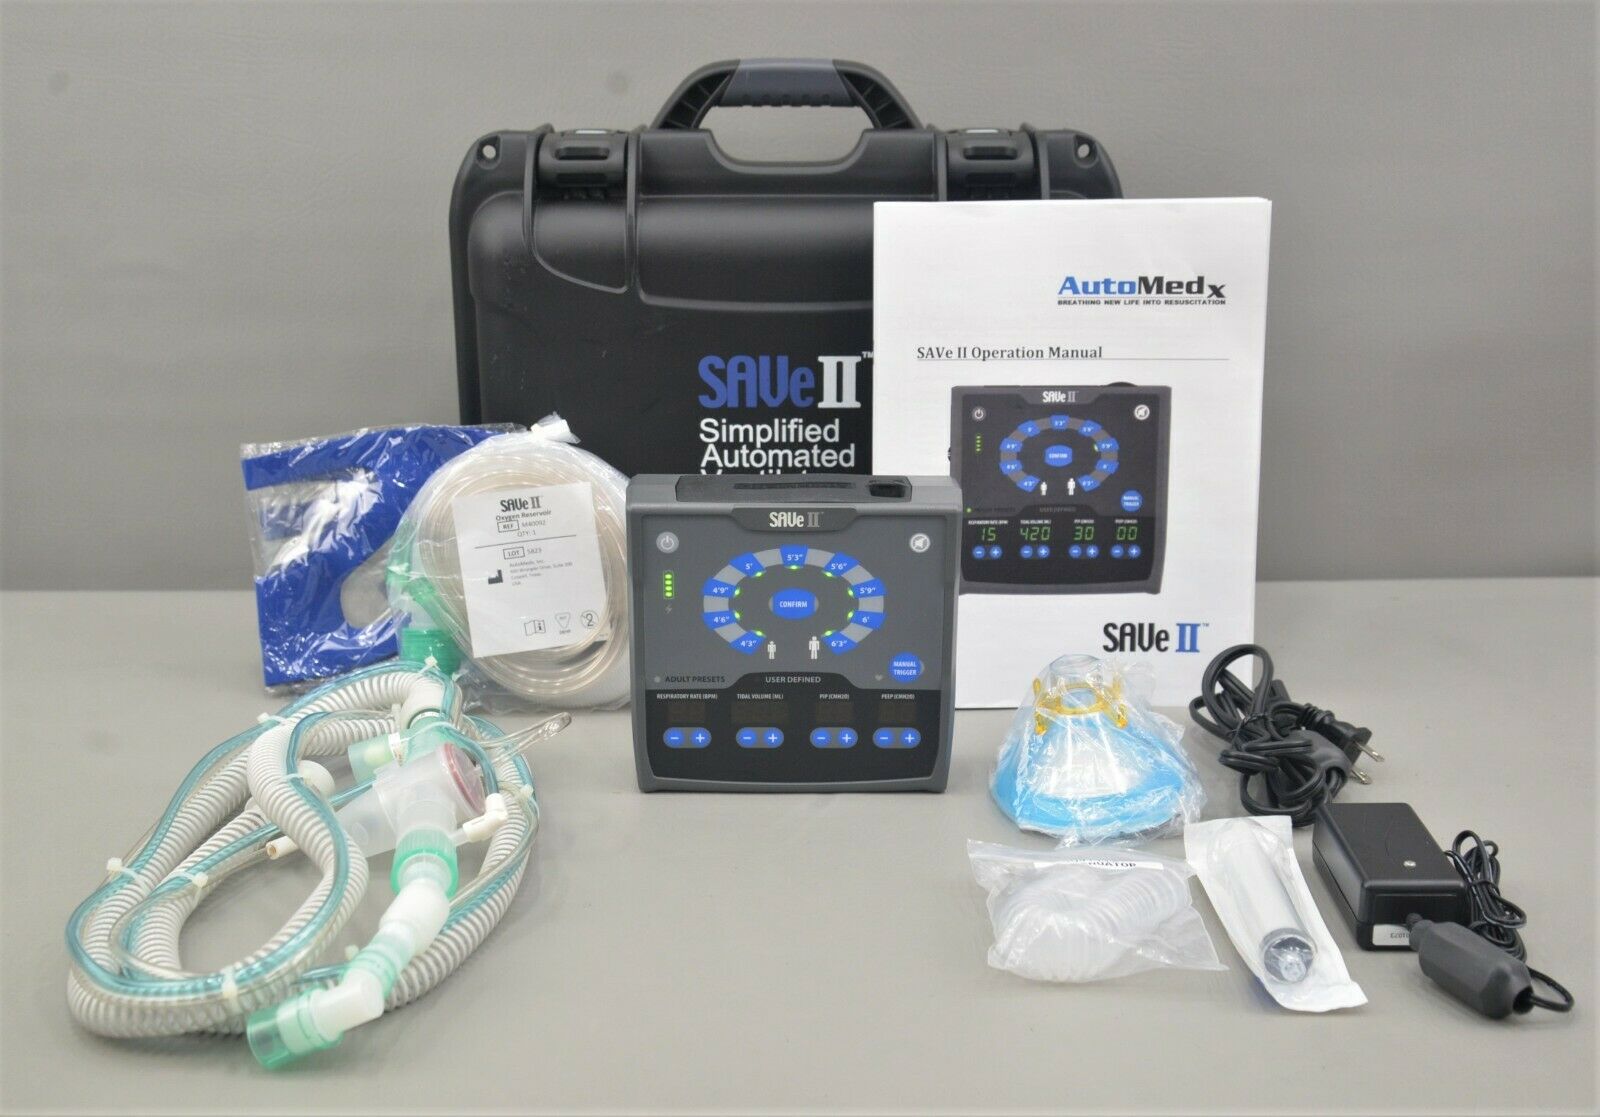 https://www.rhinotradellc.com/wp-content/uploads/imported/1/New-AutoMedx-SAVe-II-Simplified-Automated-Ventilator-with-Case-Accessories-185312712031.JPG